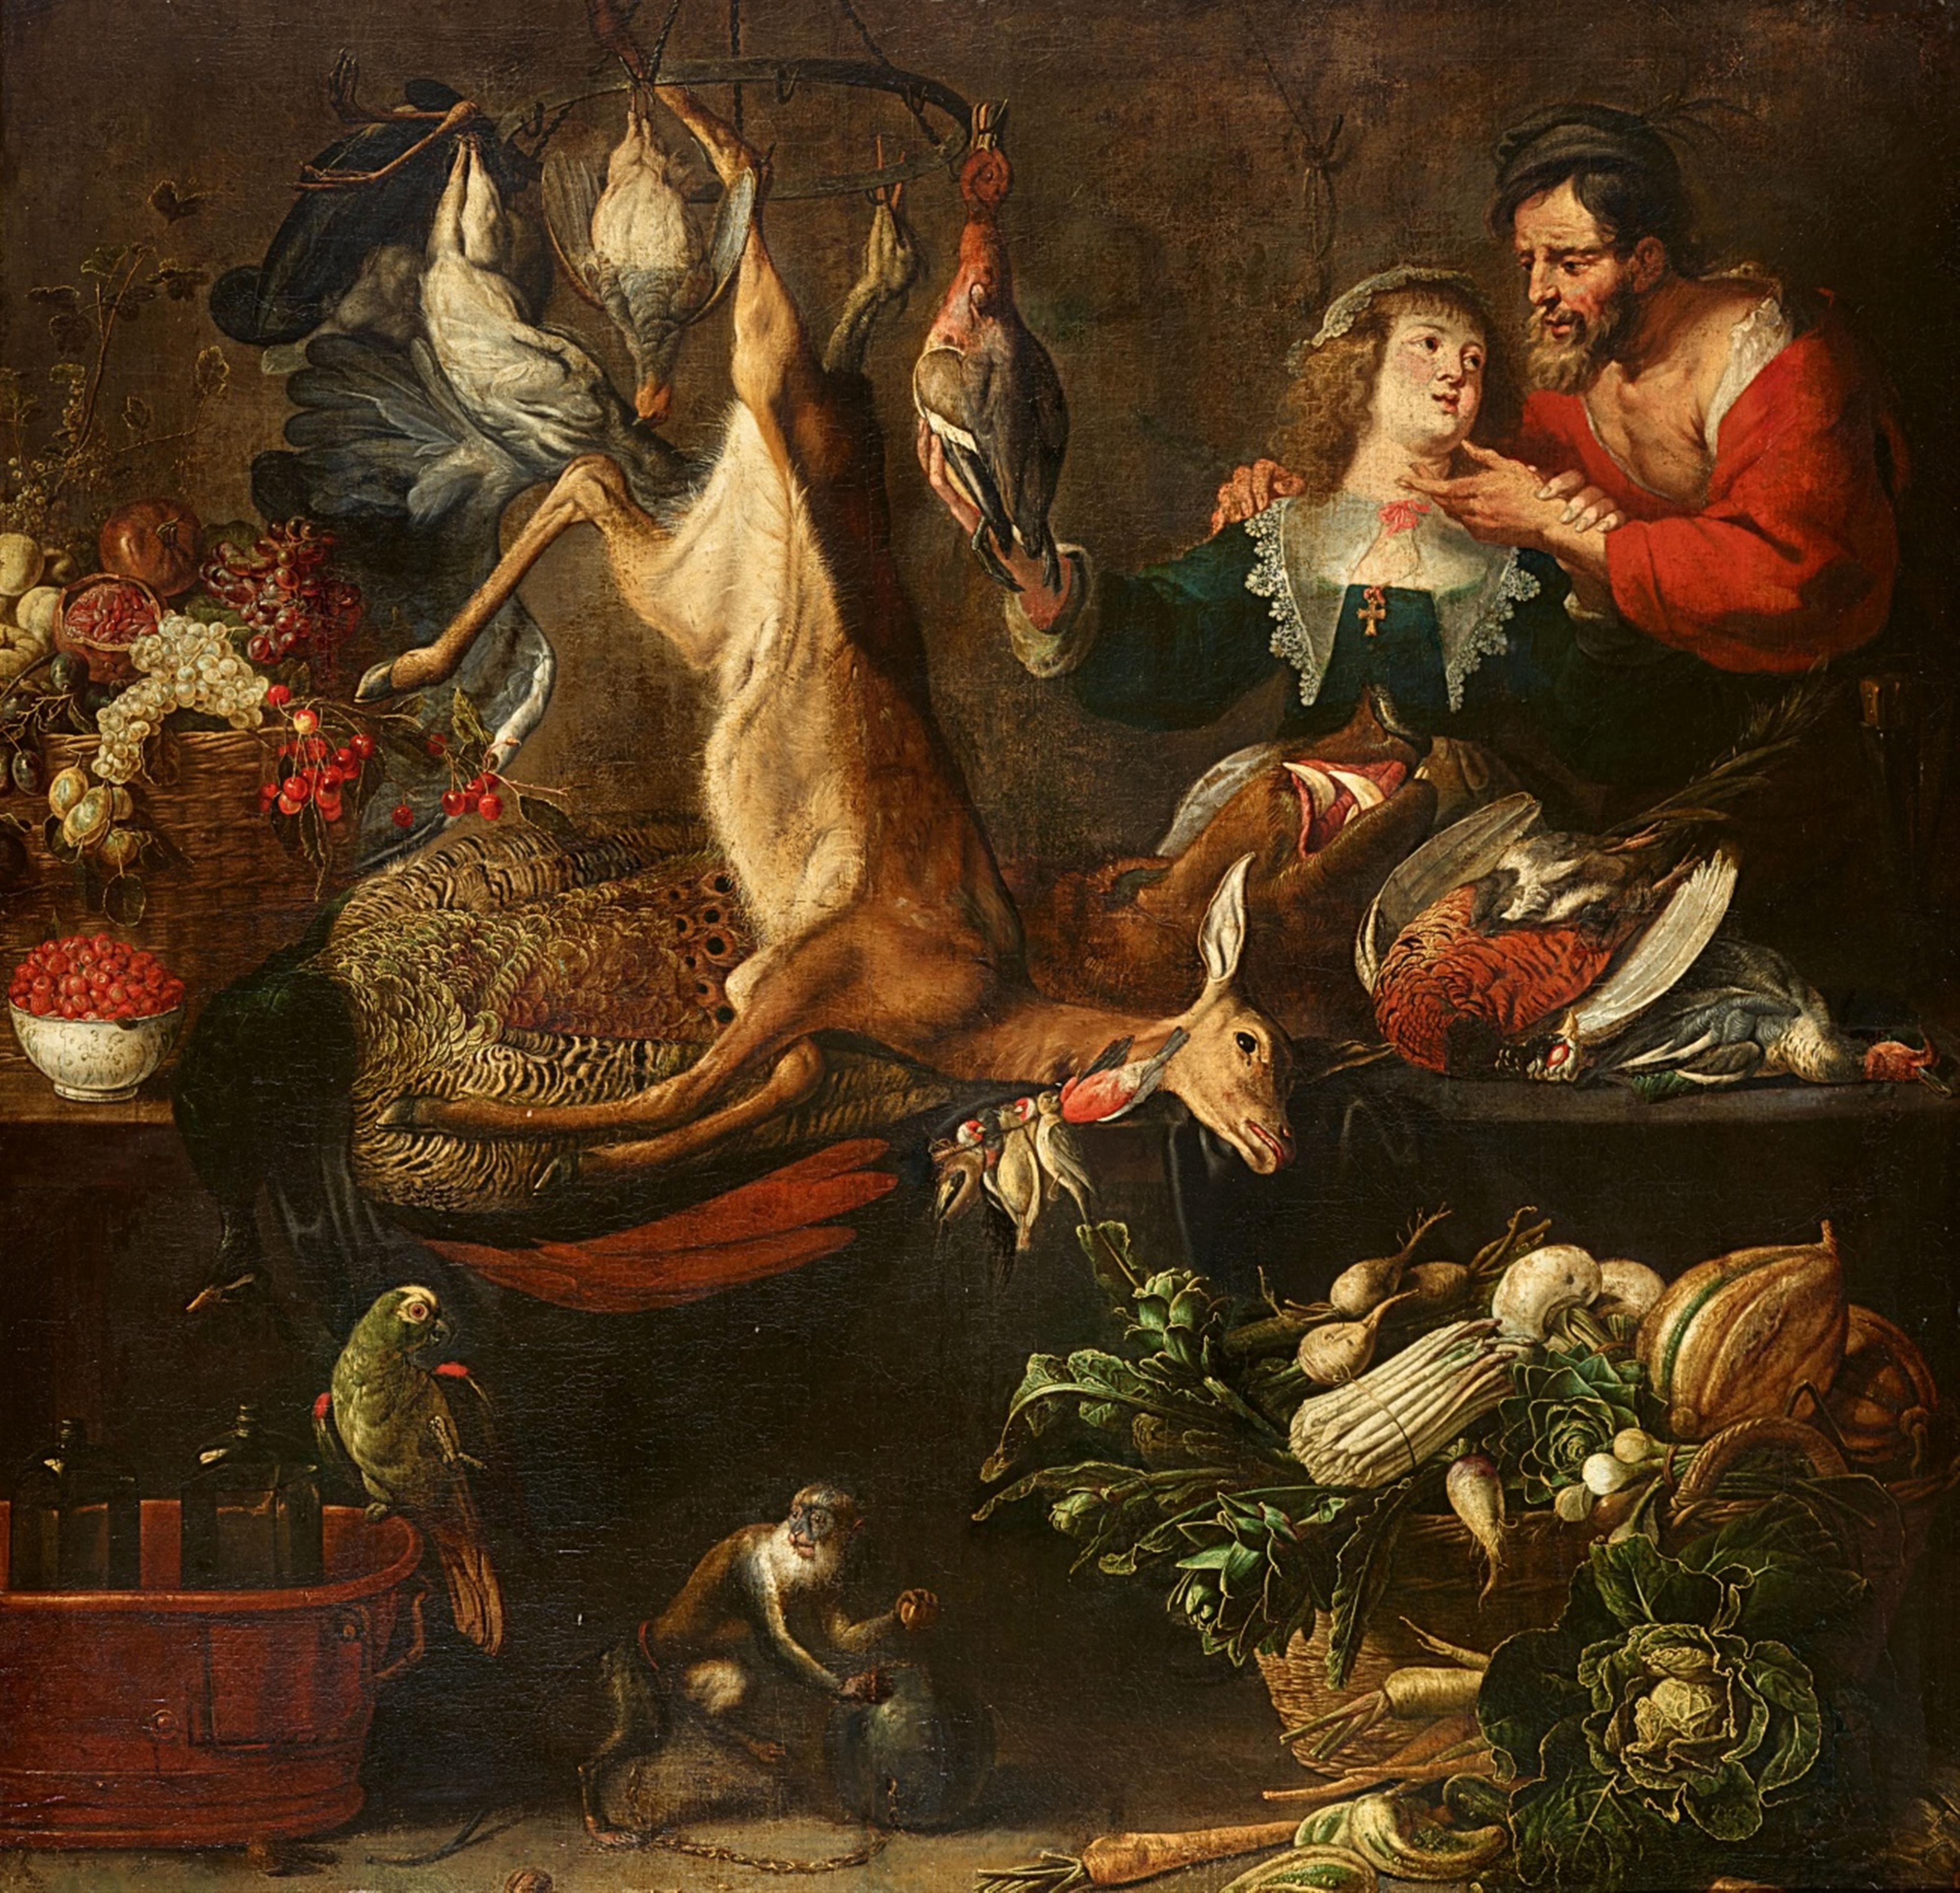 Frans Snyders, studio of - Large Still Life with a Couple, Game, Vegetables, Fruit, a Monkey, and a Parrot - image-1